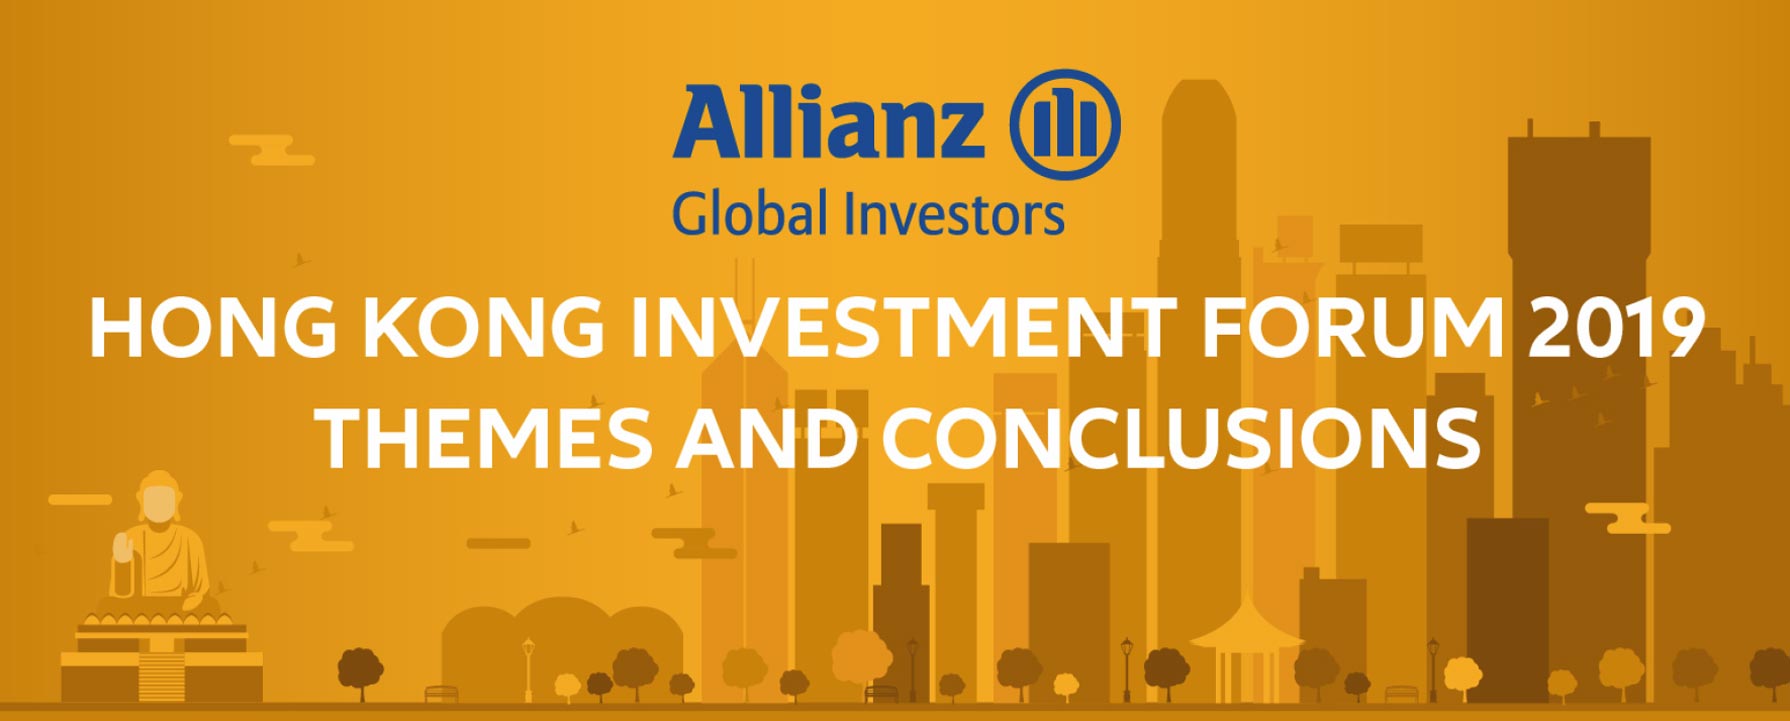 Hong Kong Investment Forum 2019 Themes and Conclusions